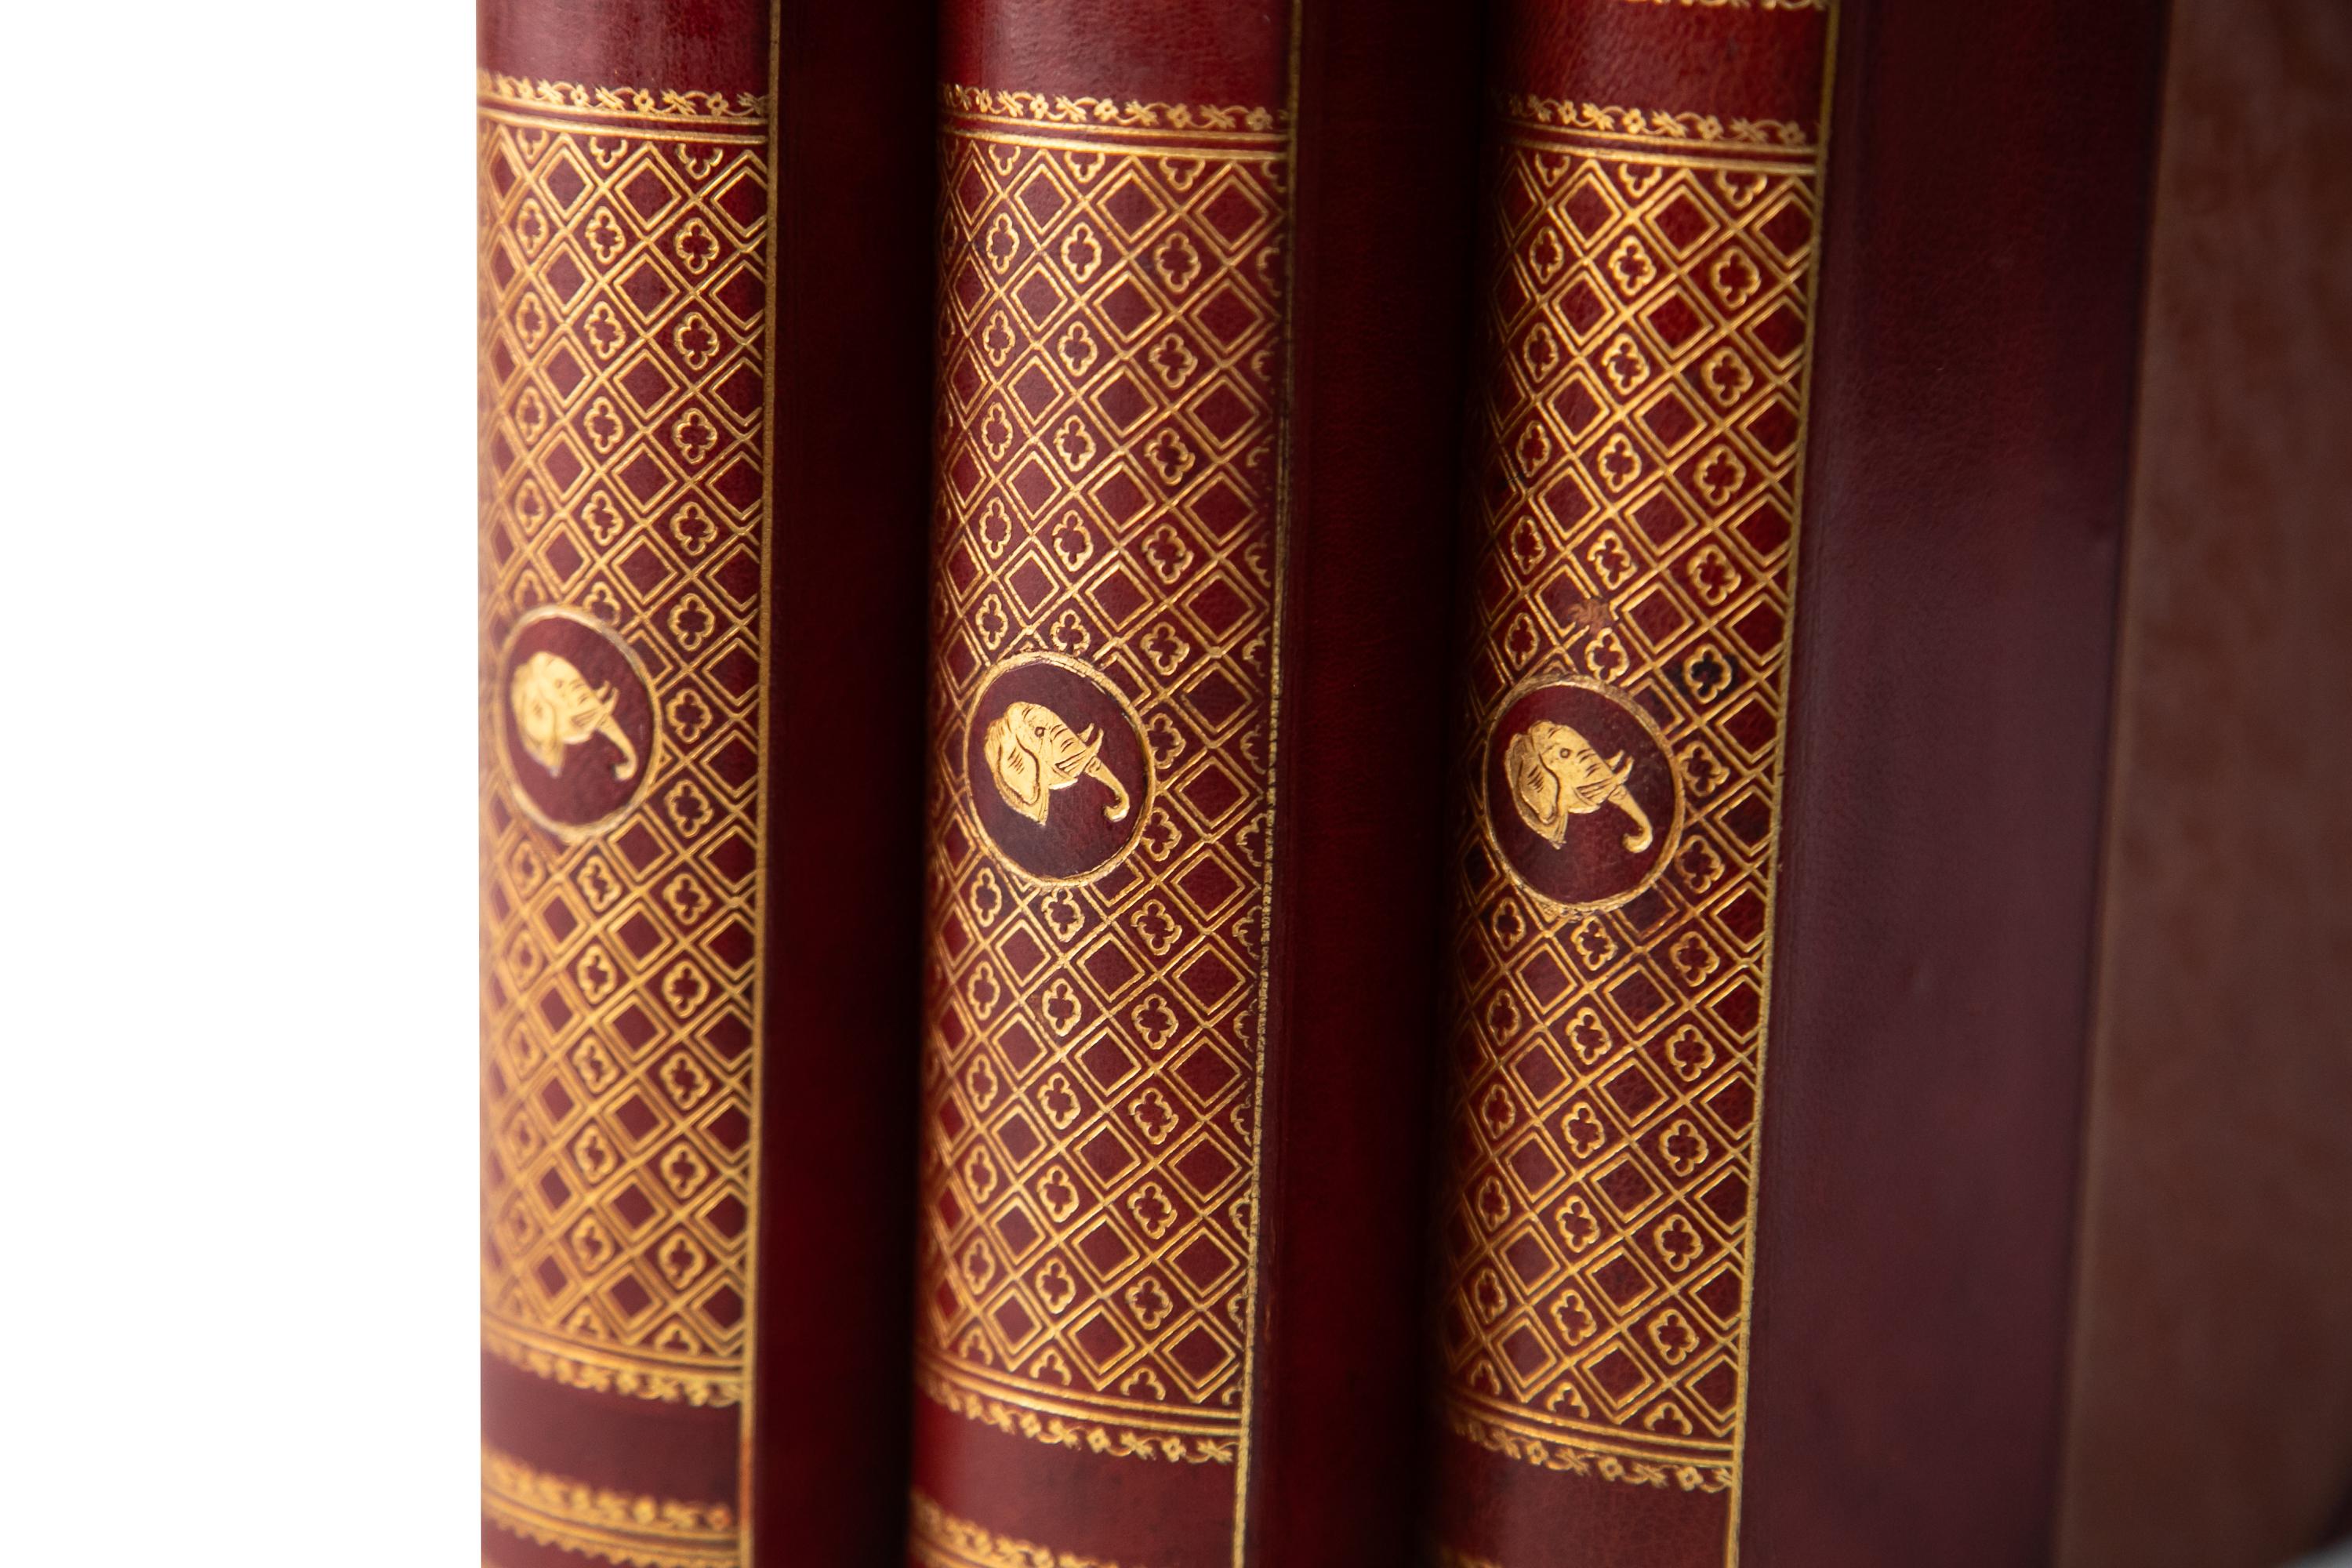 20th Century 20 Volumes. Theodore Roosevelt, The Works.